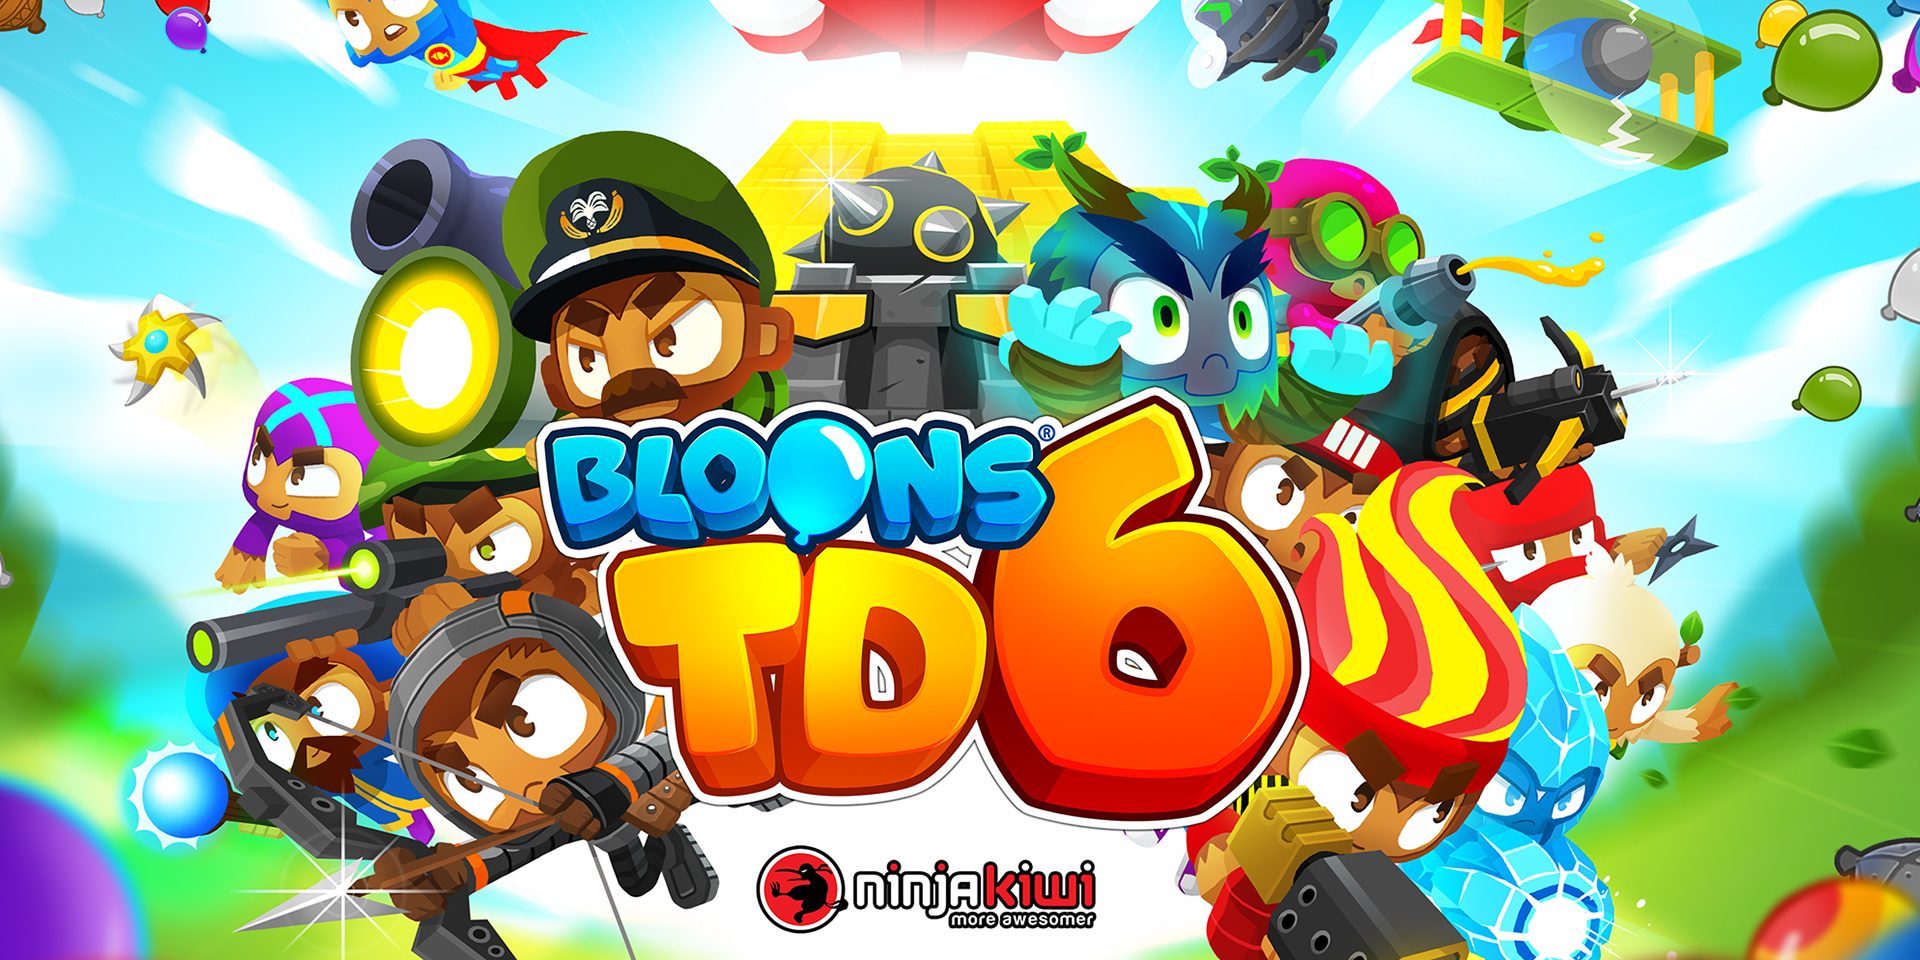 bloons td 6 highest round